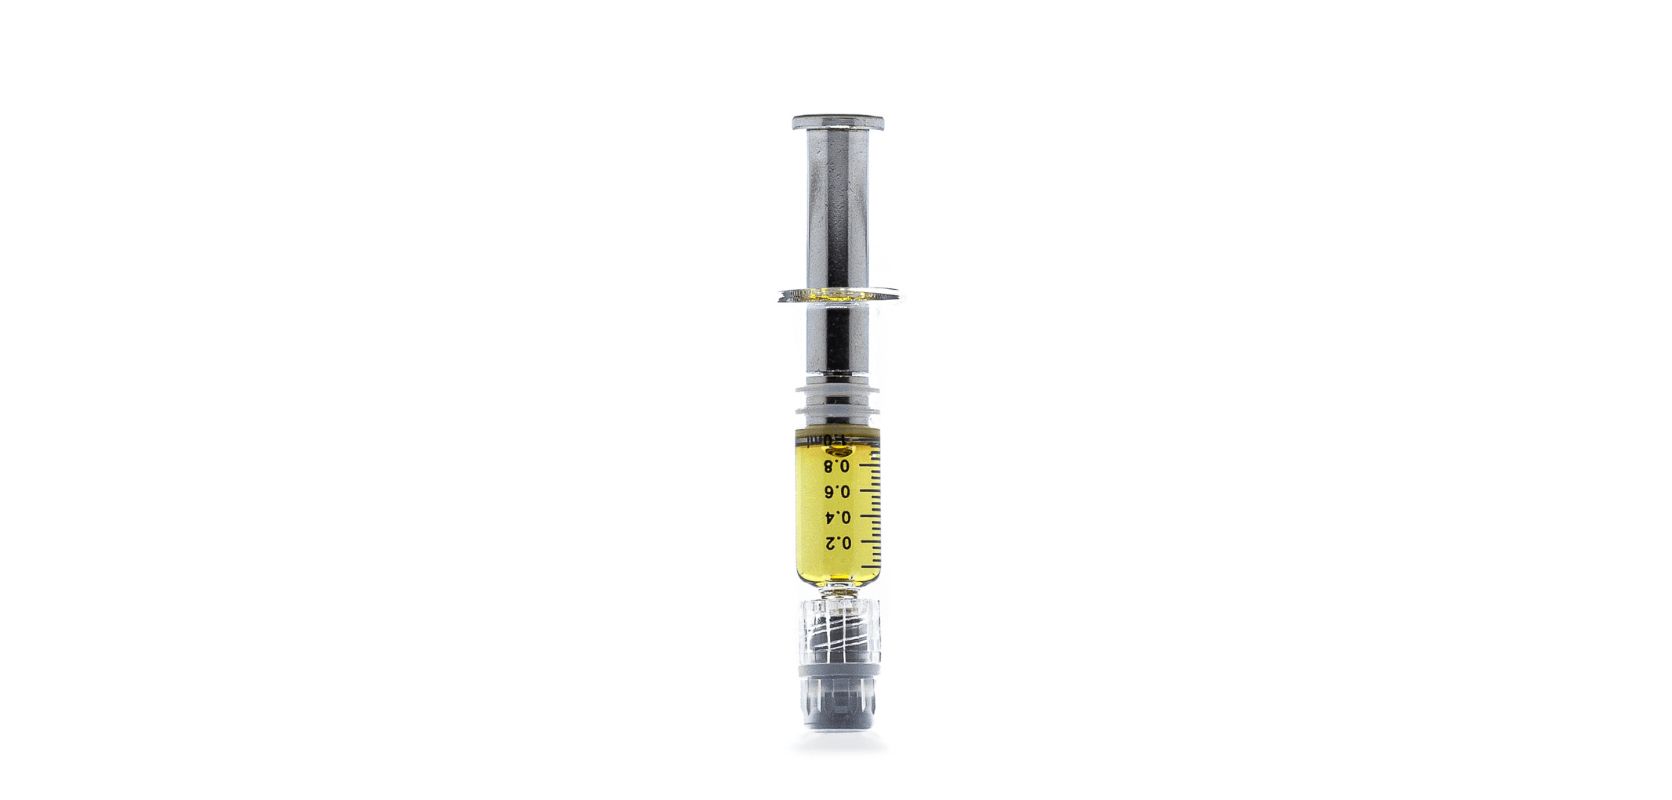 While you may be tempted, don’t just rush into buying the best THC distillate syringe. 